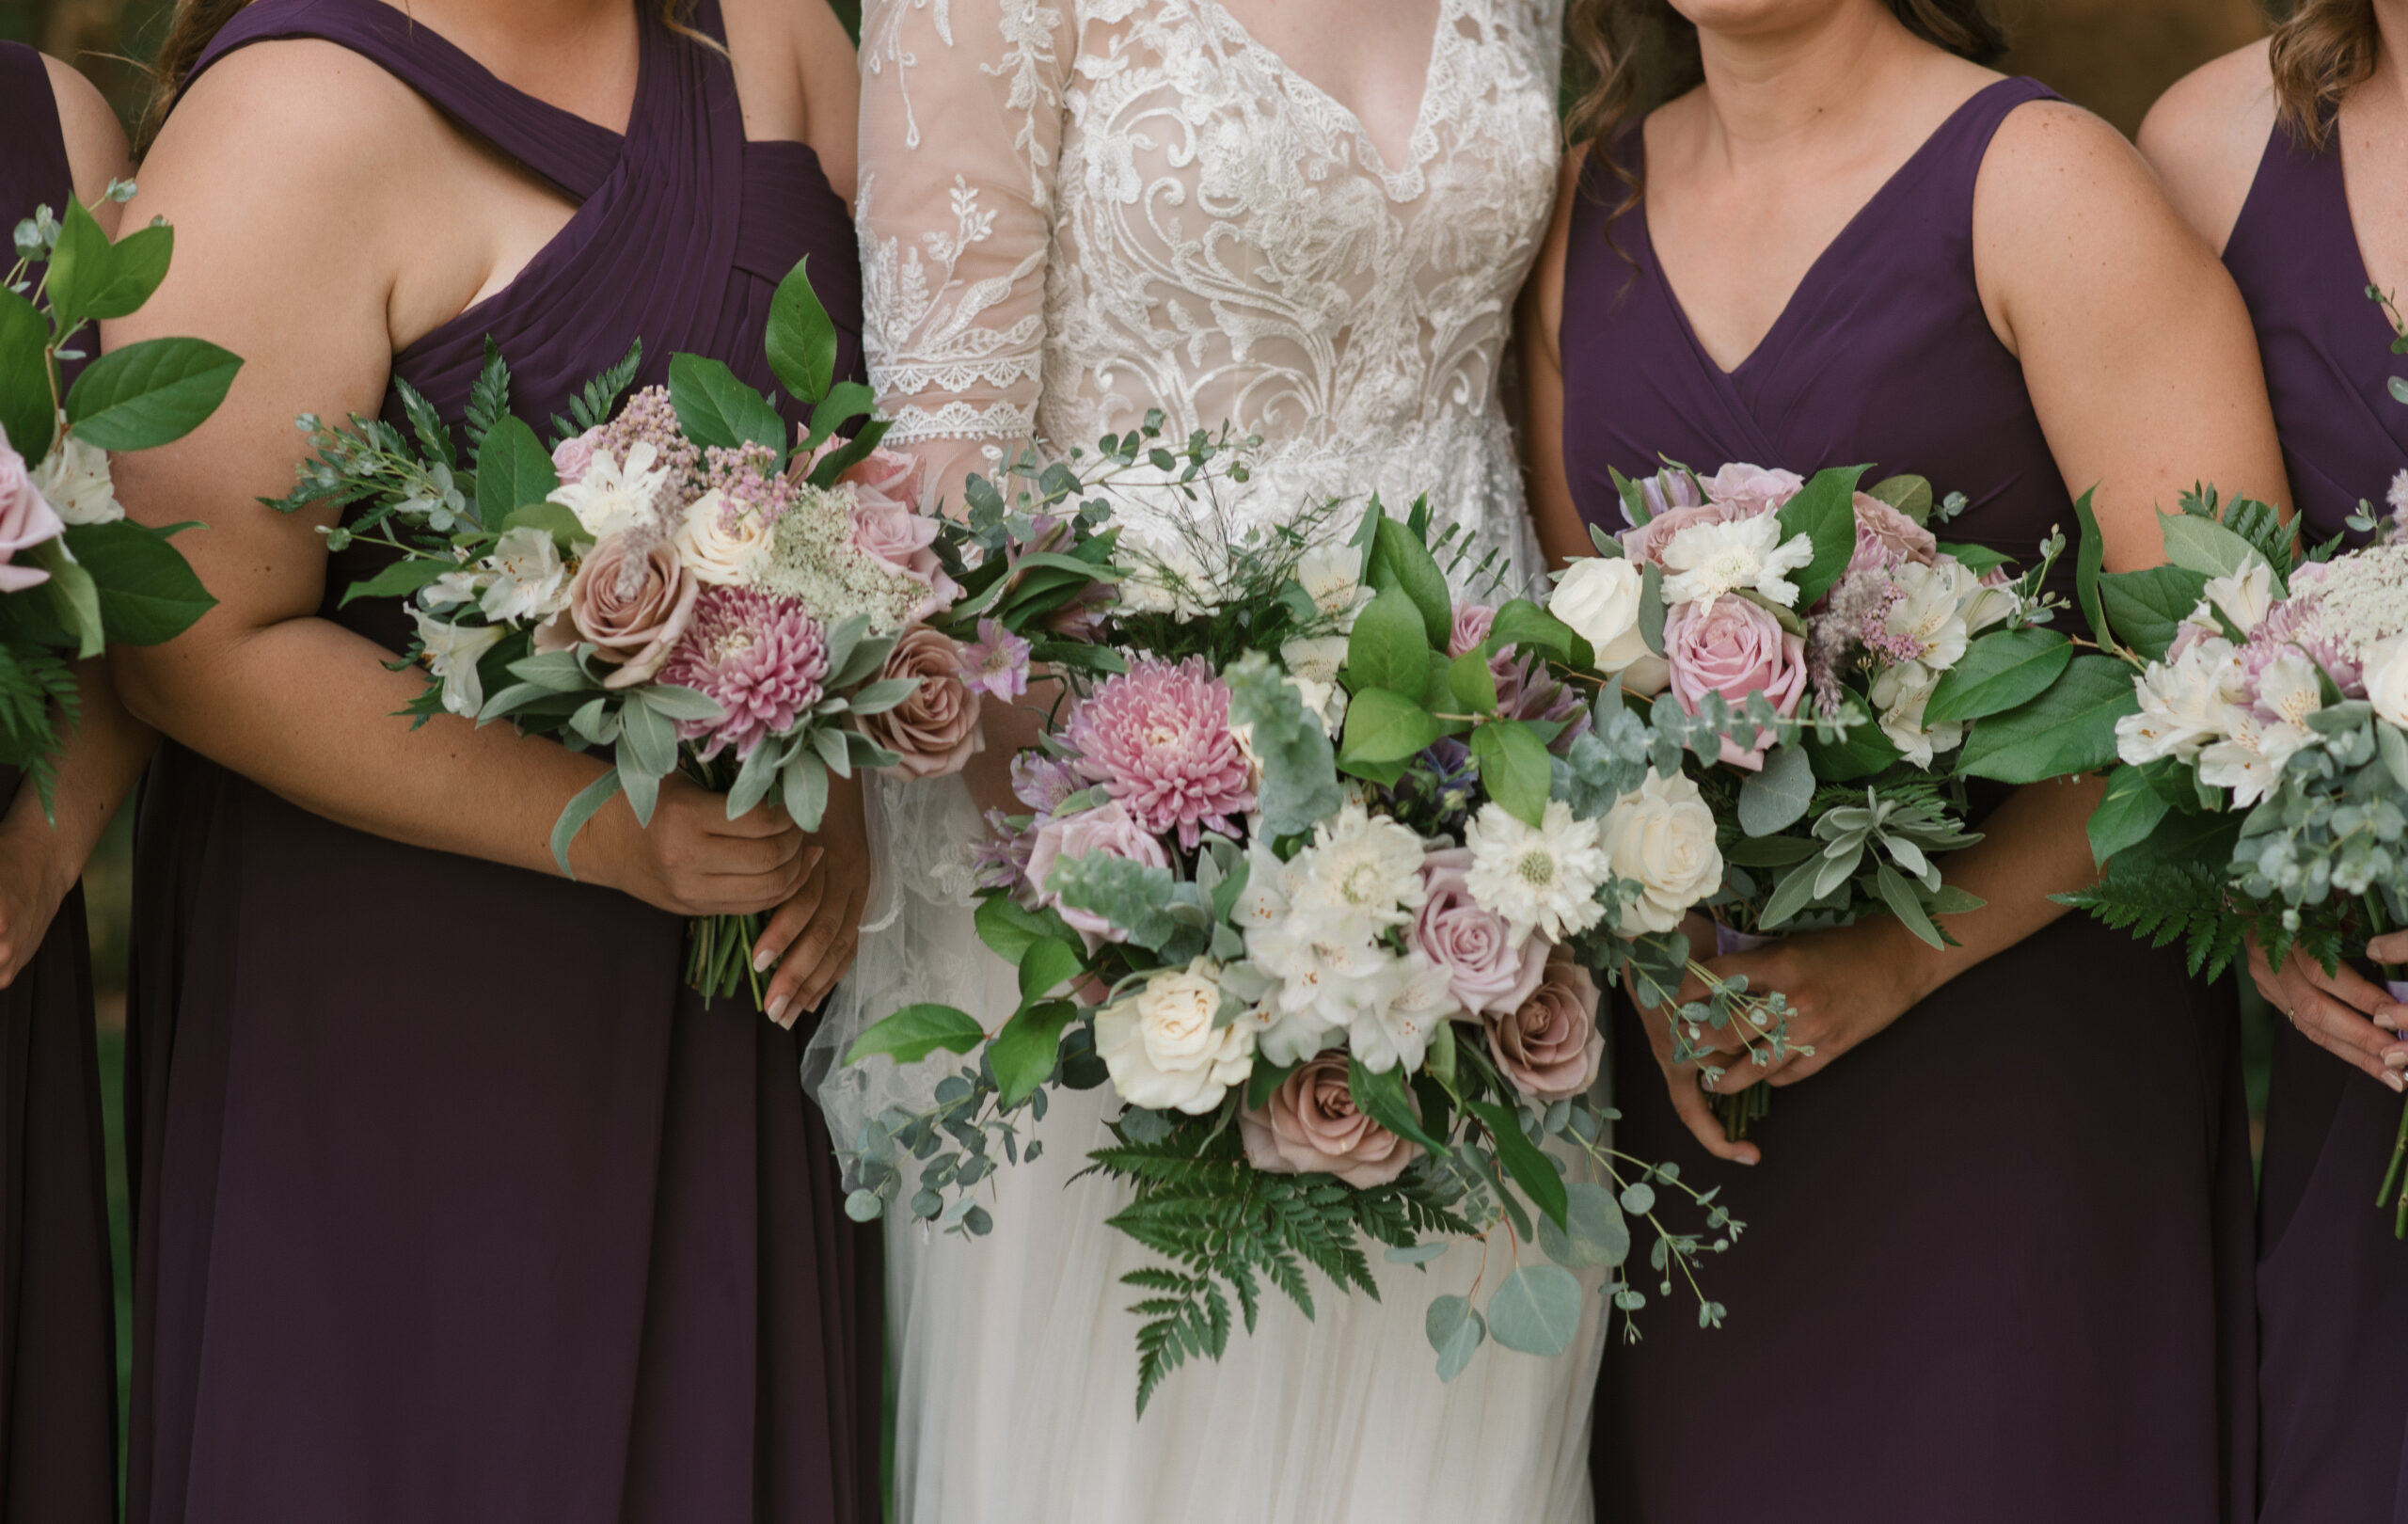 floral detail shot of bride and bridesmaids holding bouquets